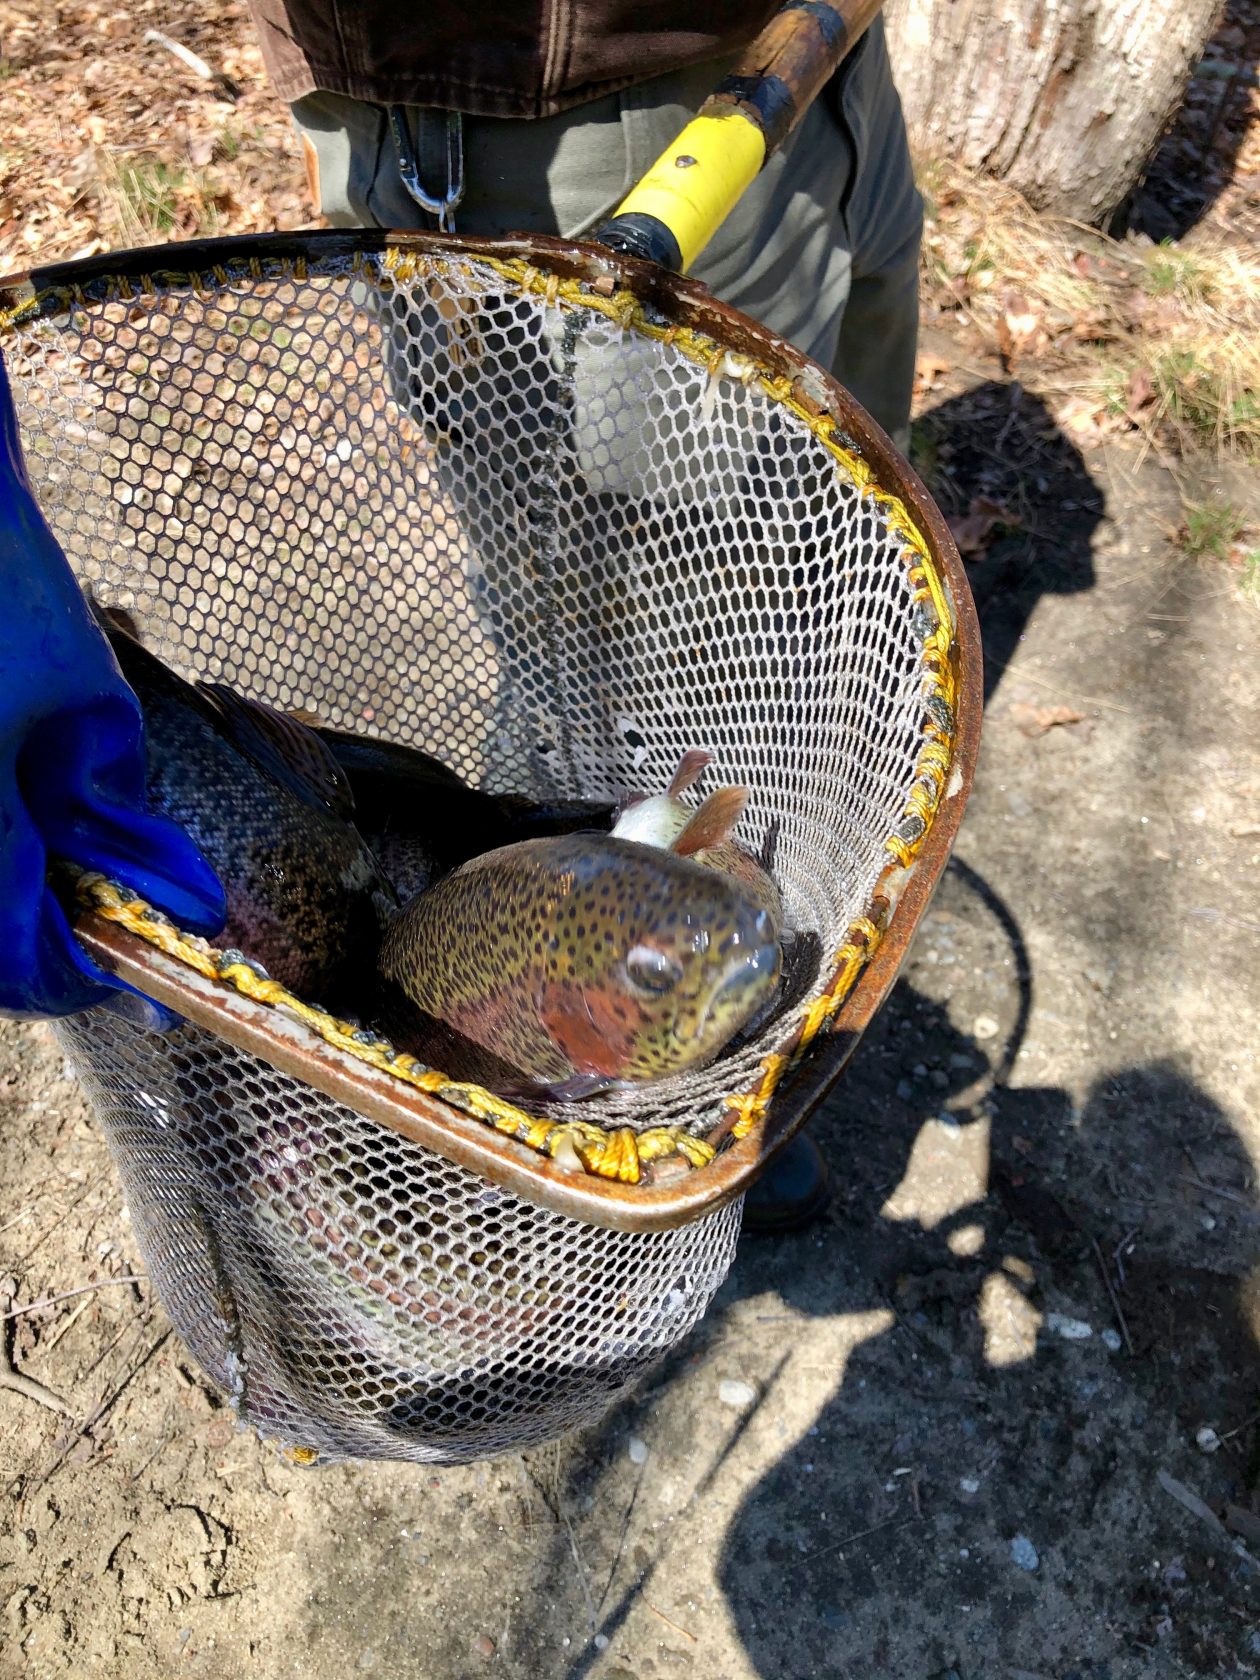 Fish Stocking has begun The Westfield News April 1, 2021